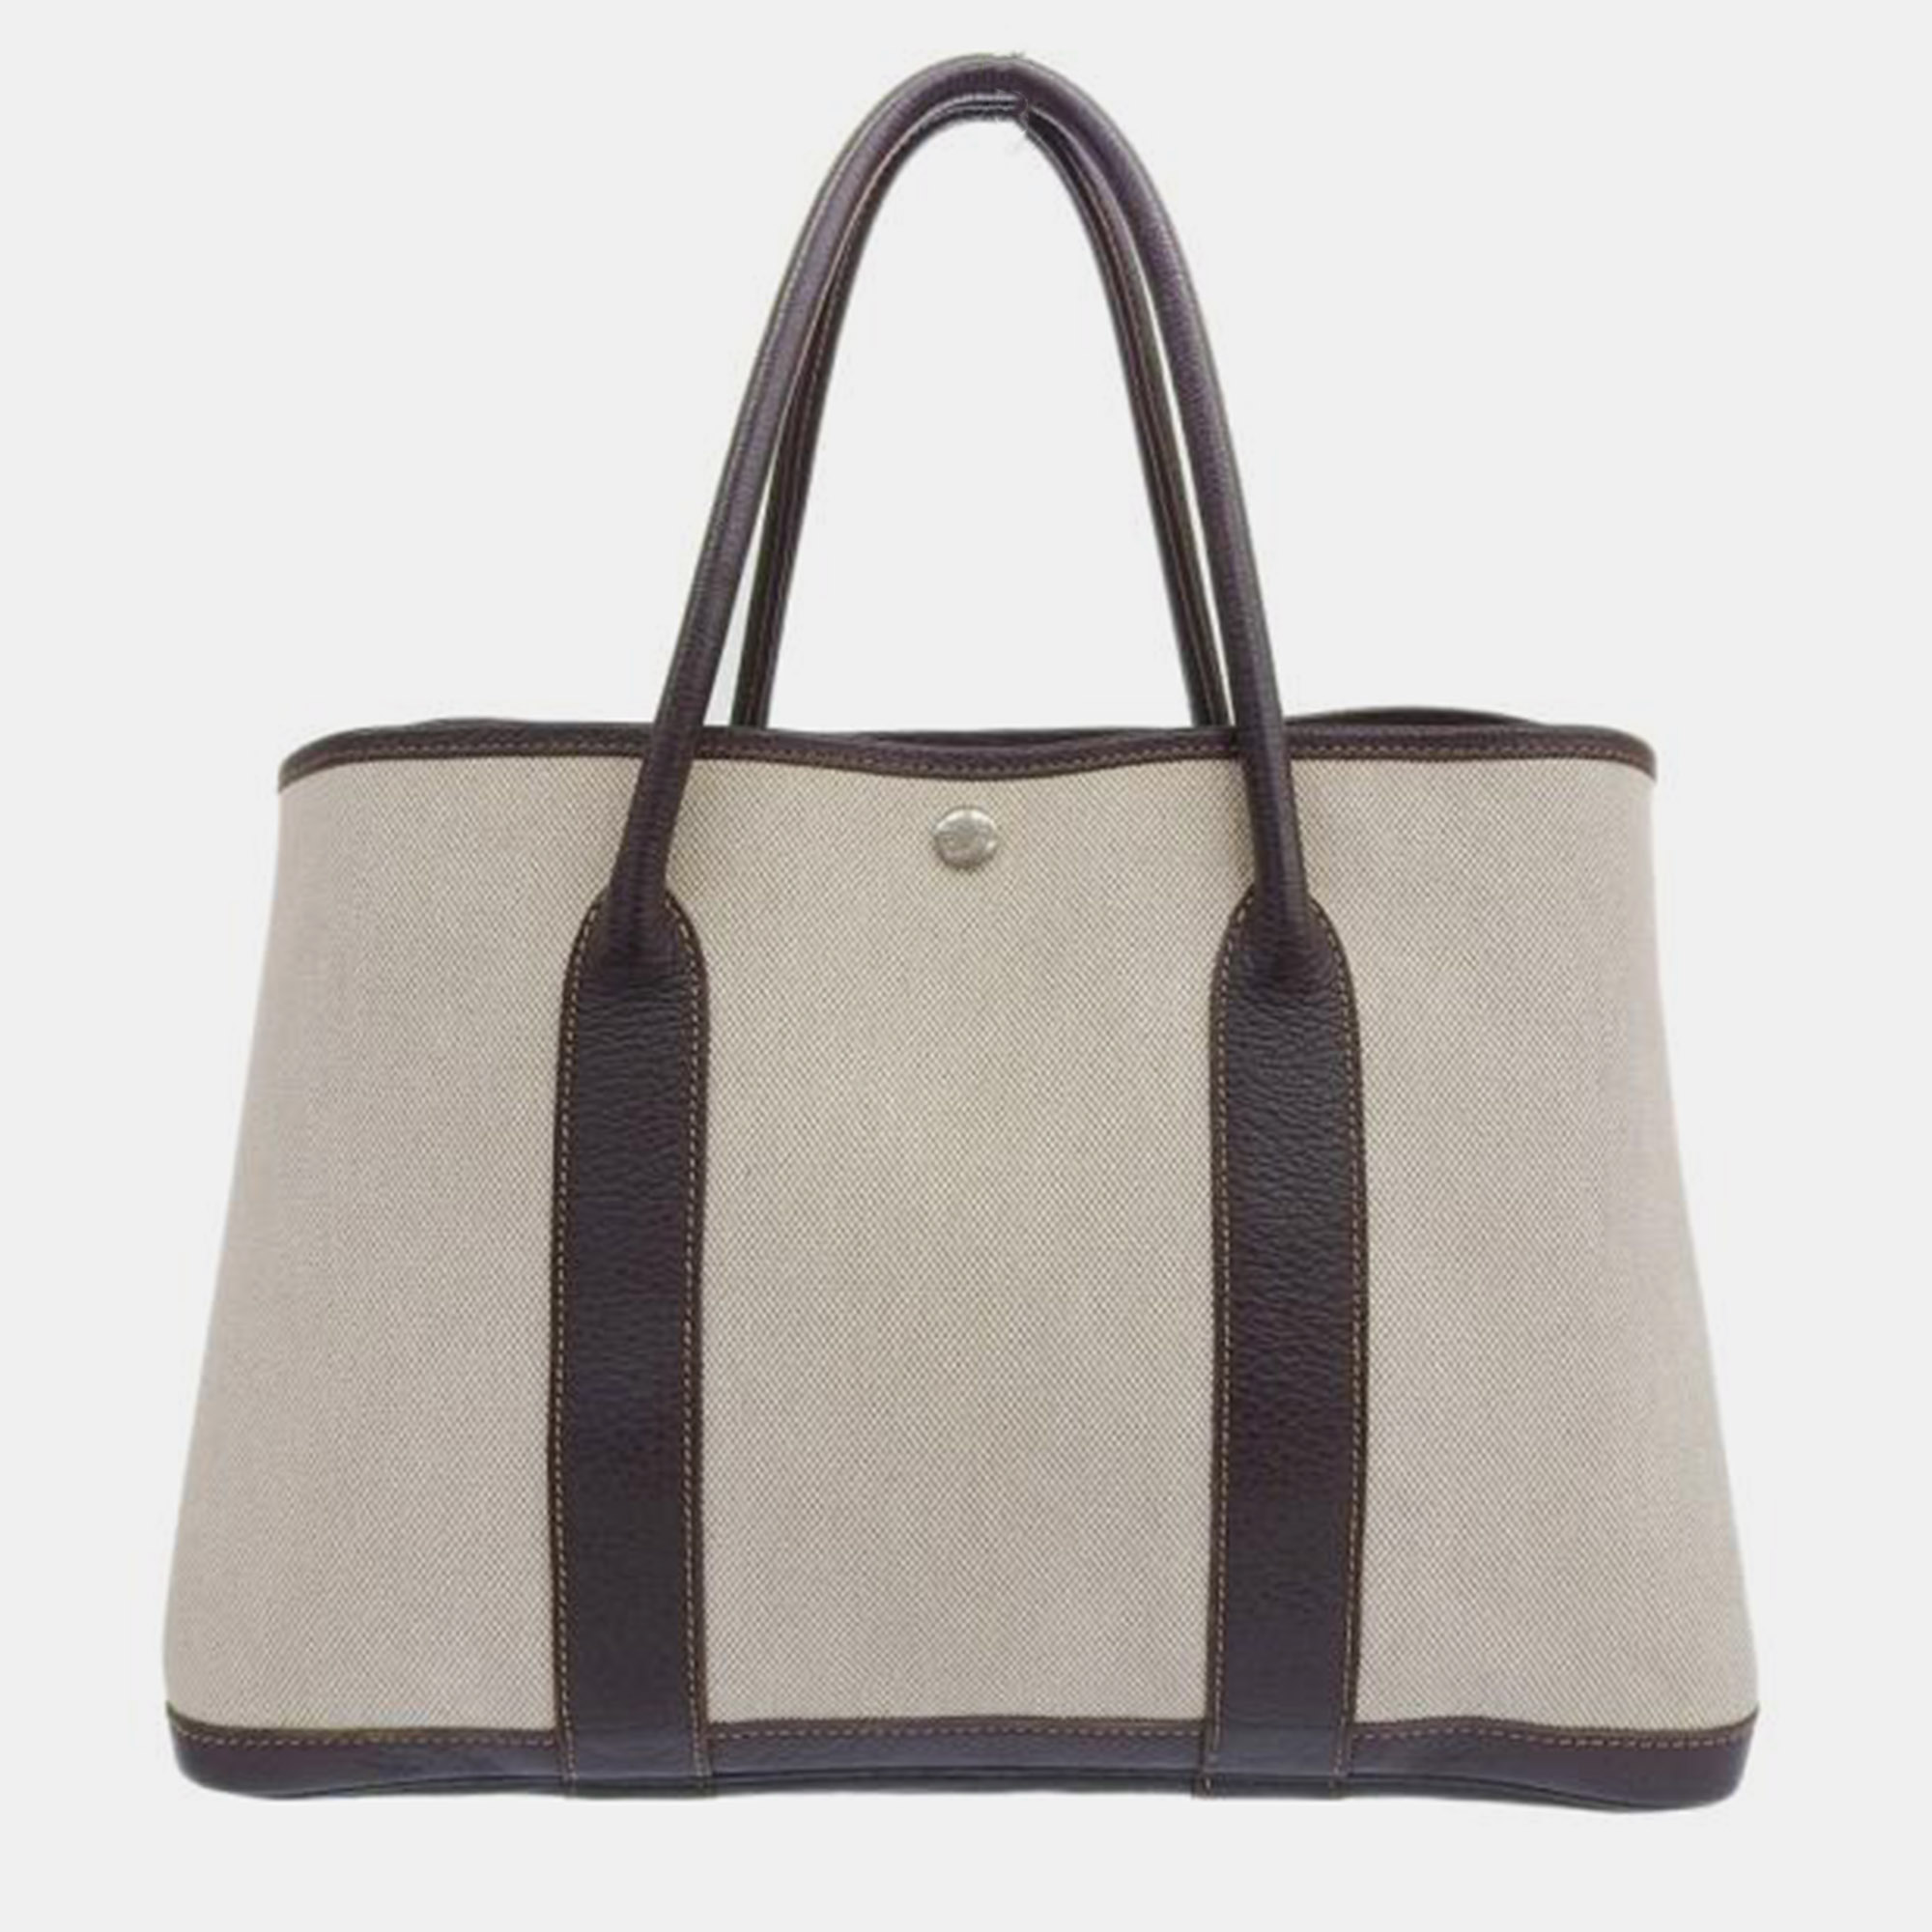 Hermes Brown Leather Canvas Garden Party PM Tote Bag